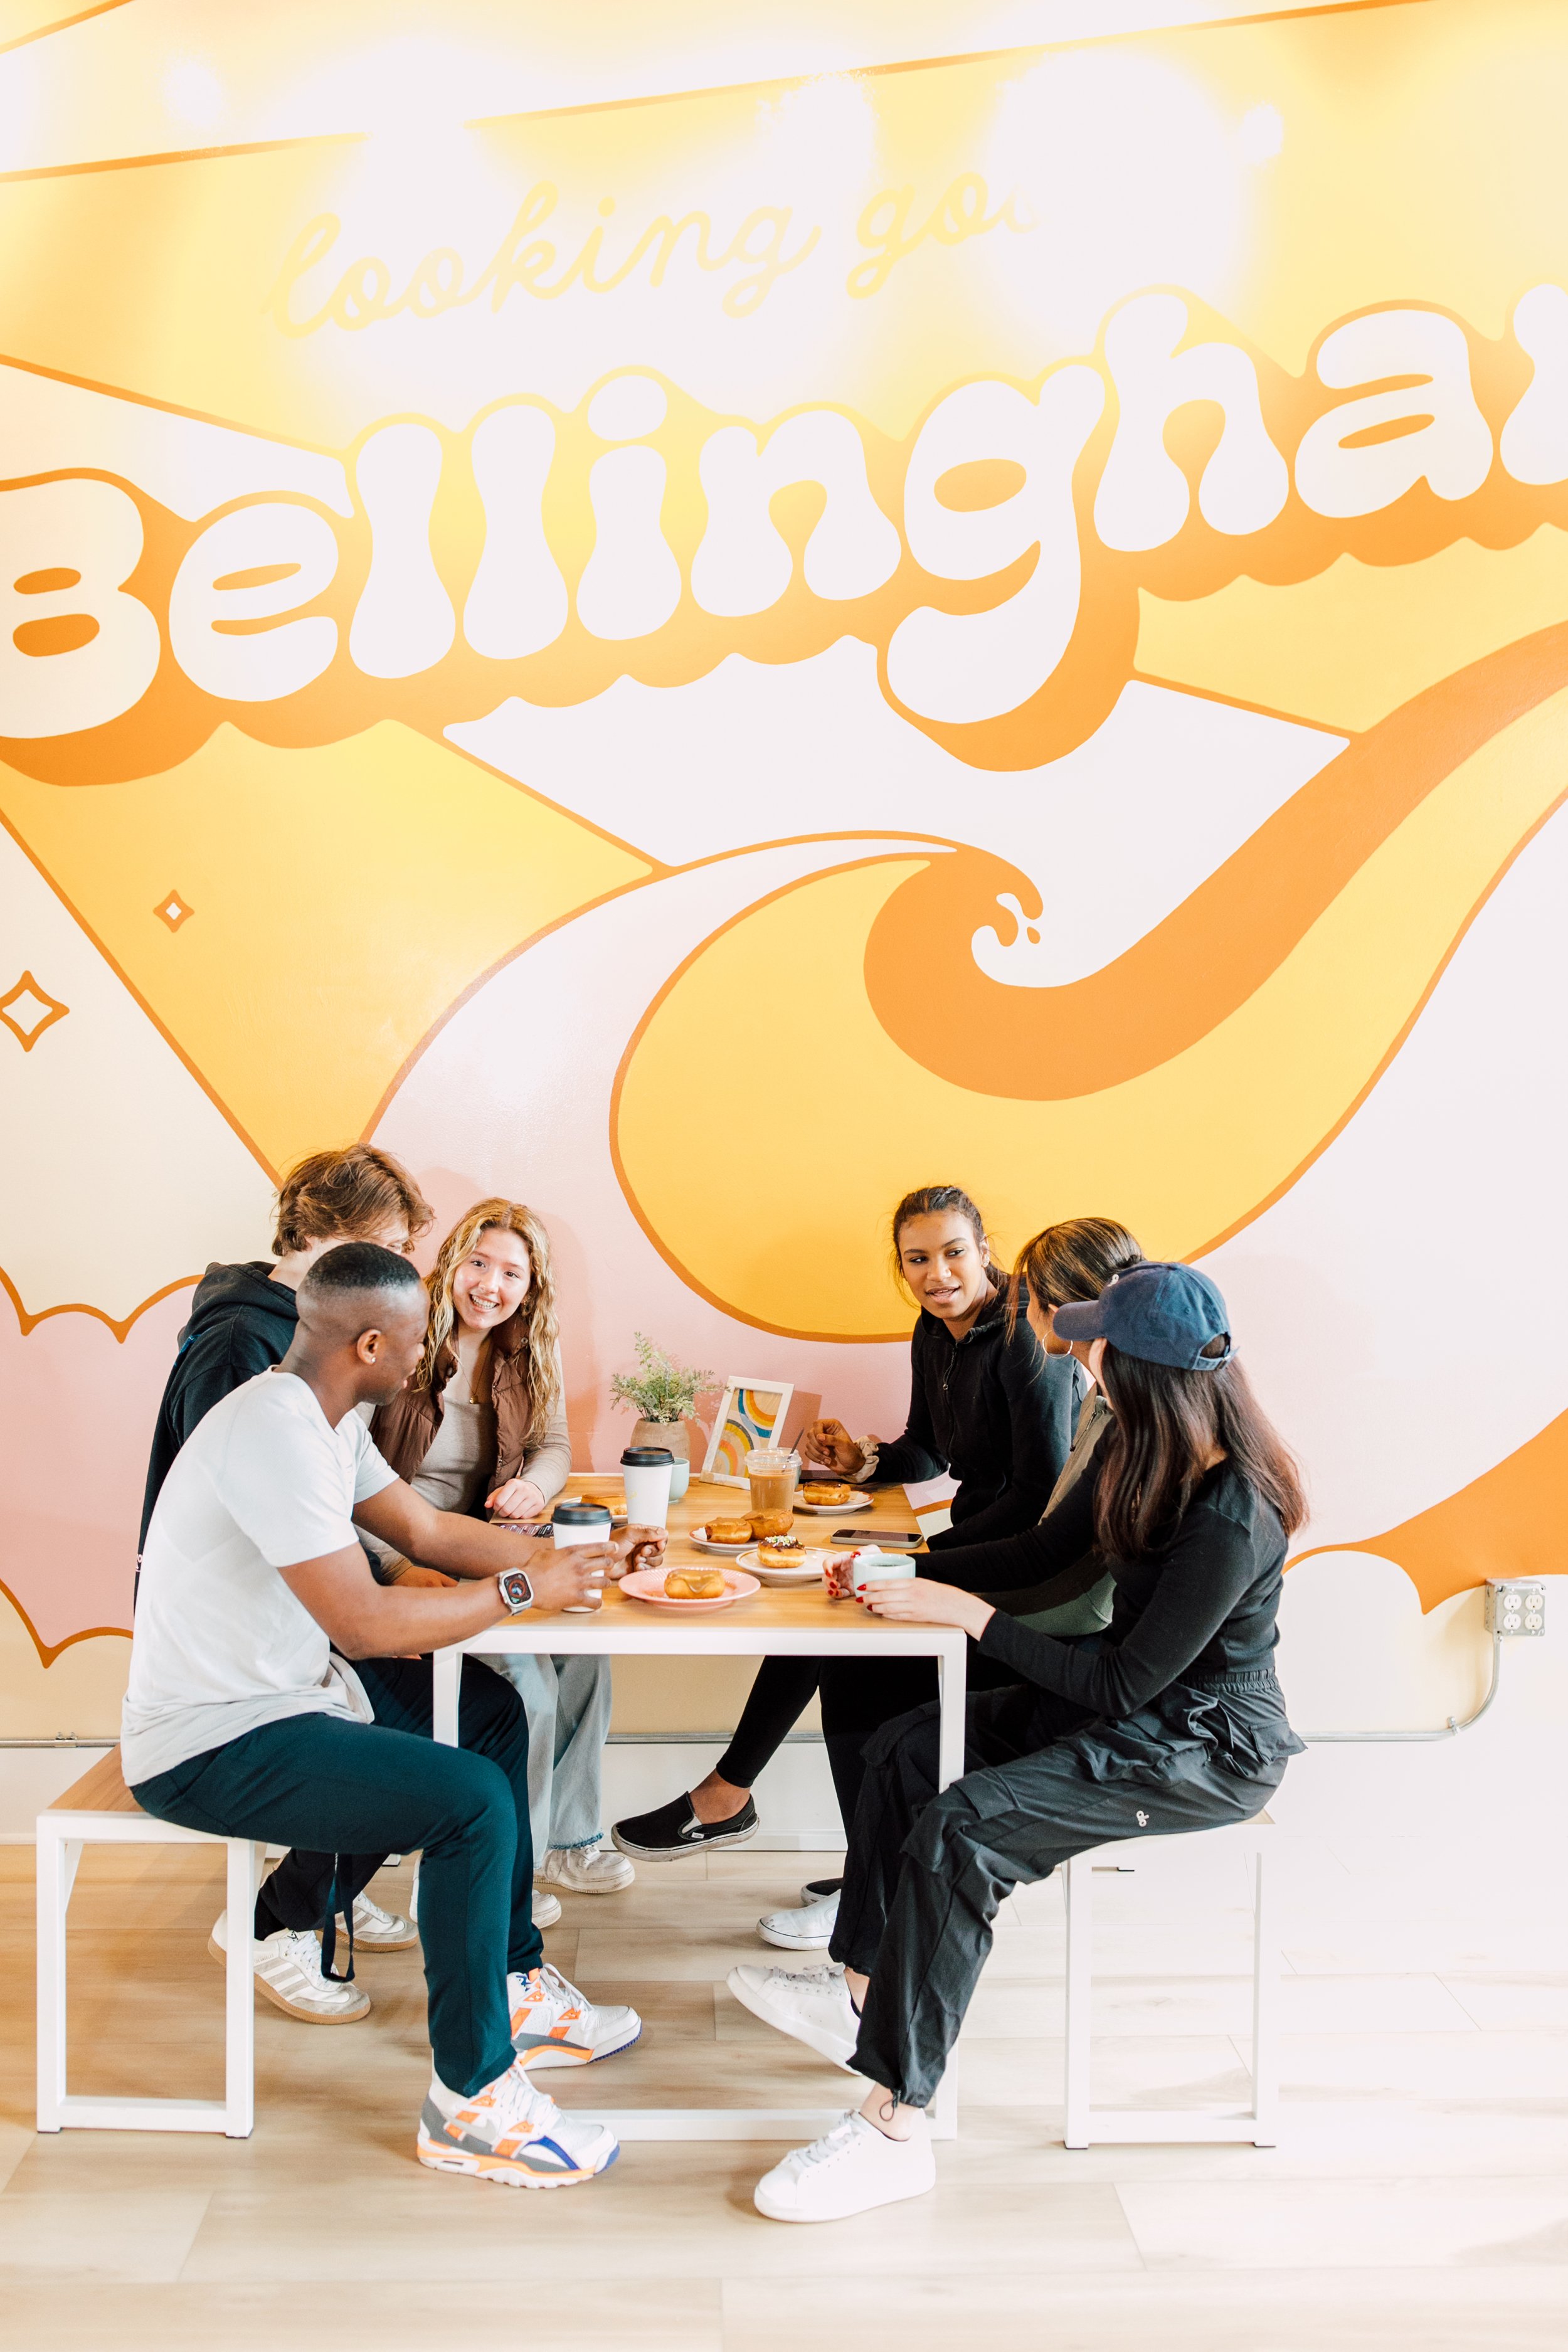 Bellingham Seattle Food Photography Business Branding Photographer Katheryn Moran Maple Bar Cordata Whatcom Community College Students Hanging Out Coffee Shop